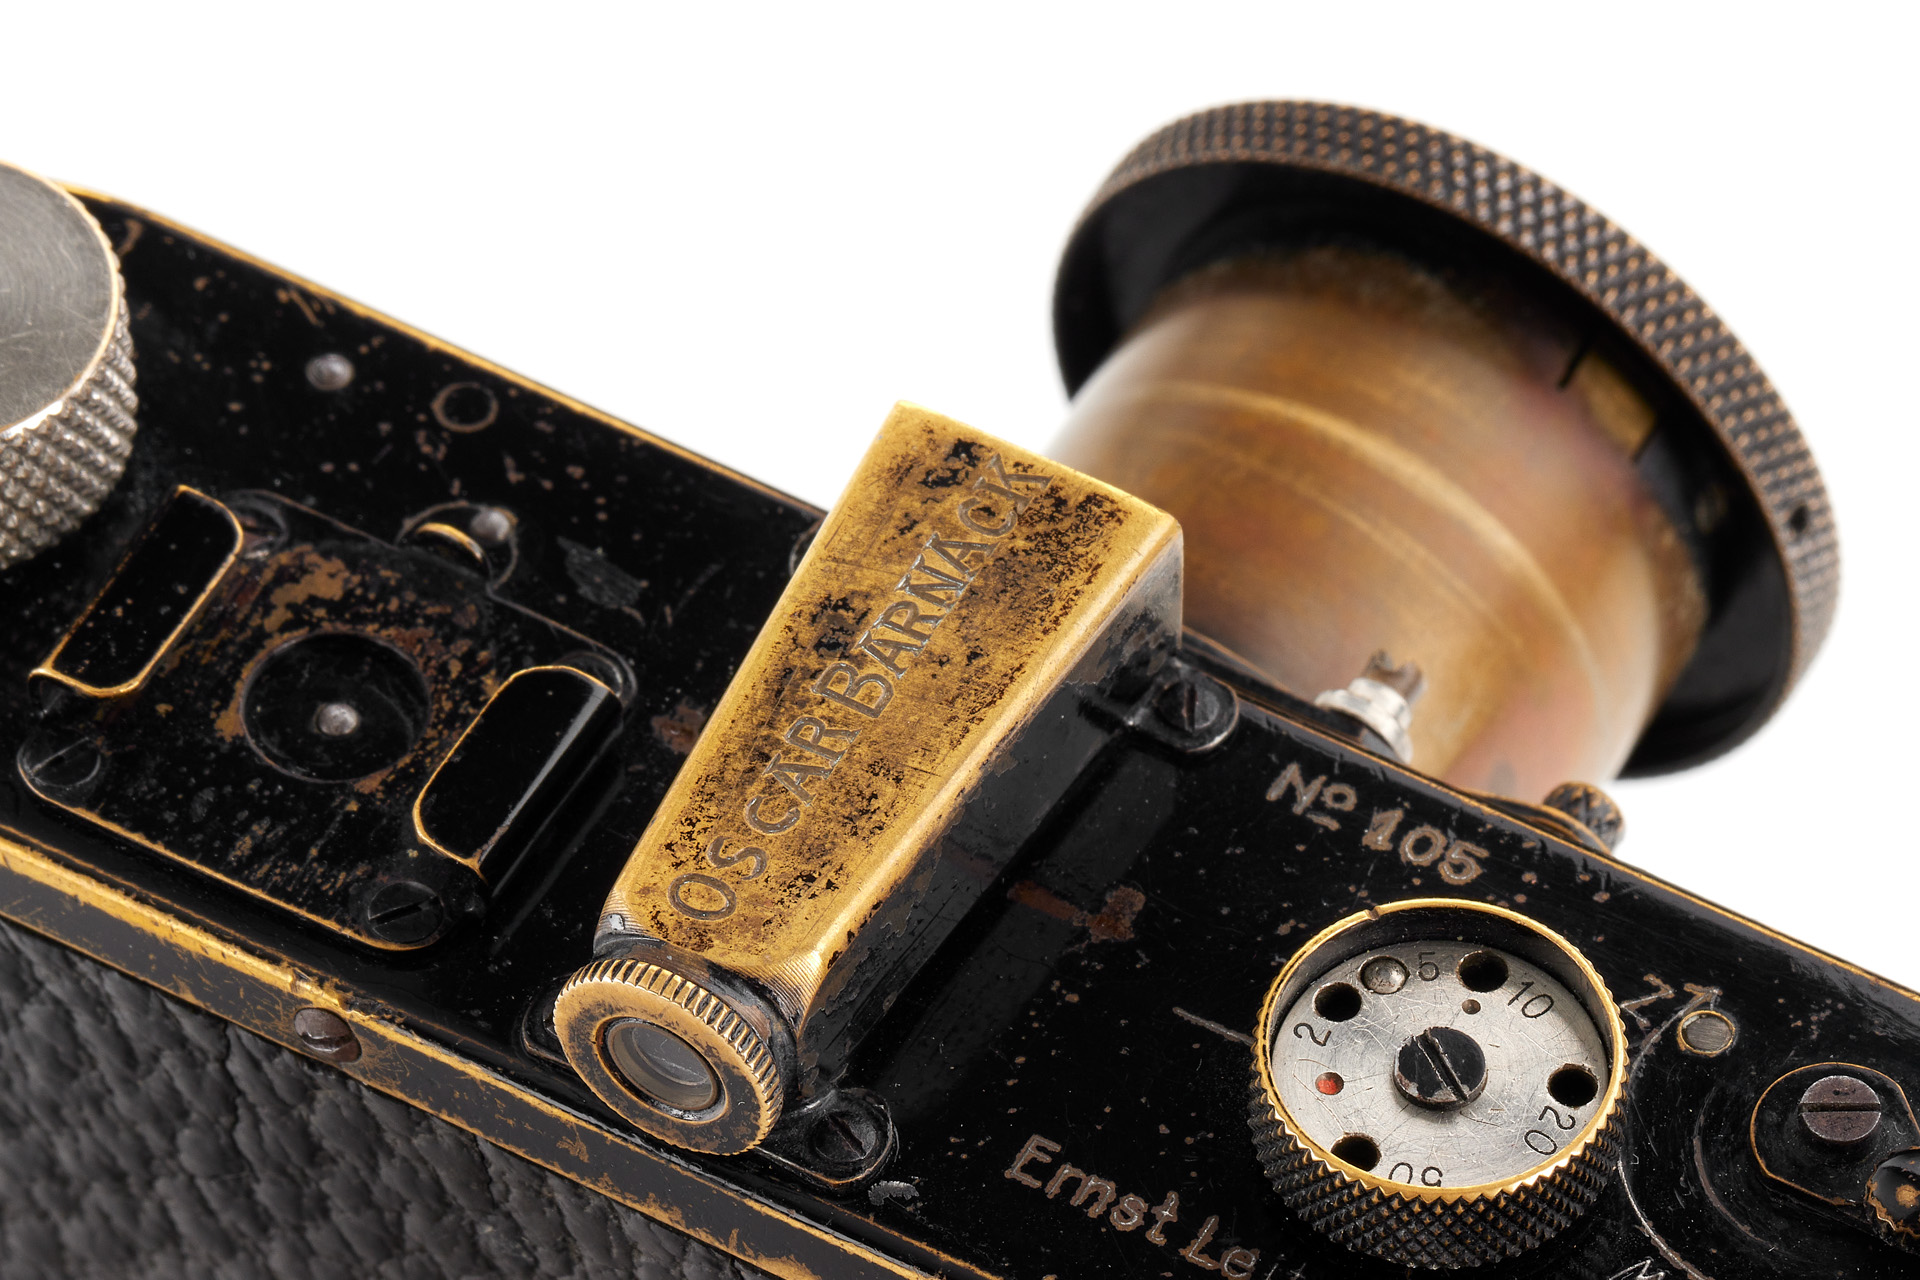 $21 Million Leica Becomes Most Expensive Camera Ever Sold